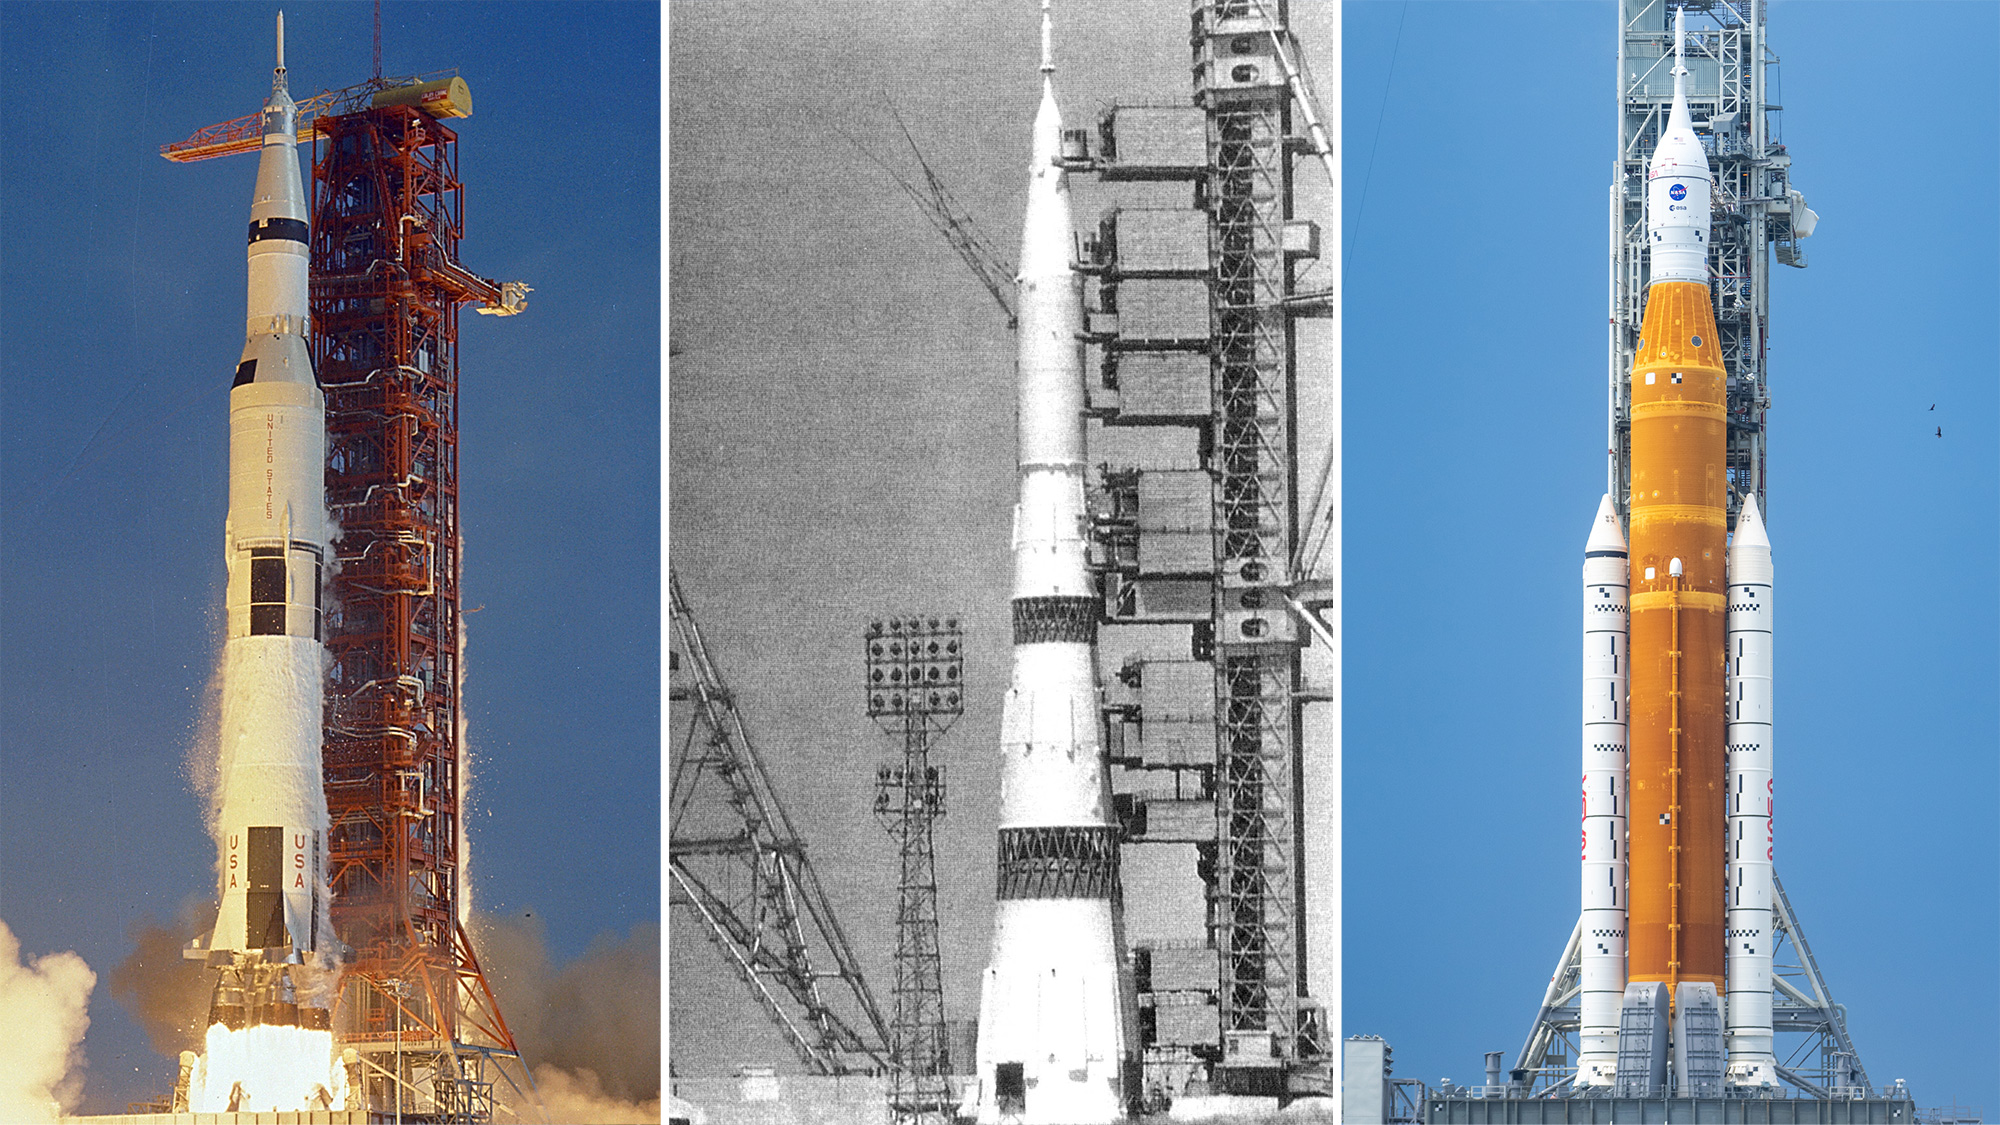 From left: NASA's Saturn V rocket, Russia's N-1 lunar launch rocket, and NASA's Space Launch System rocket.